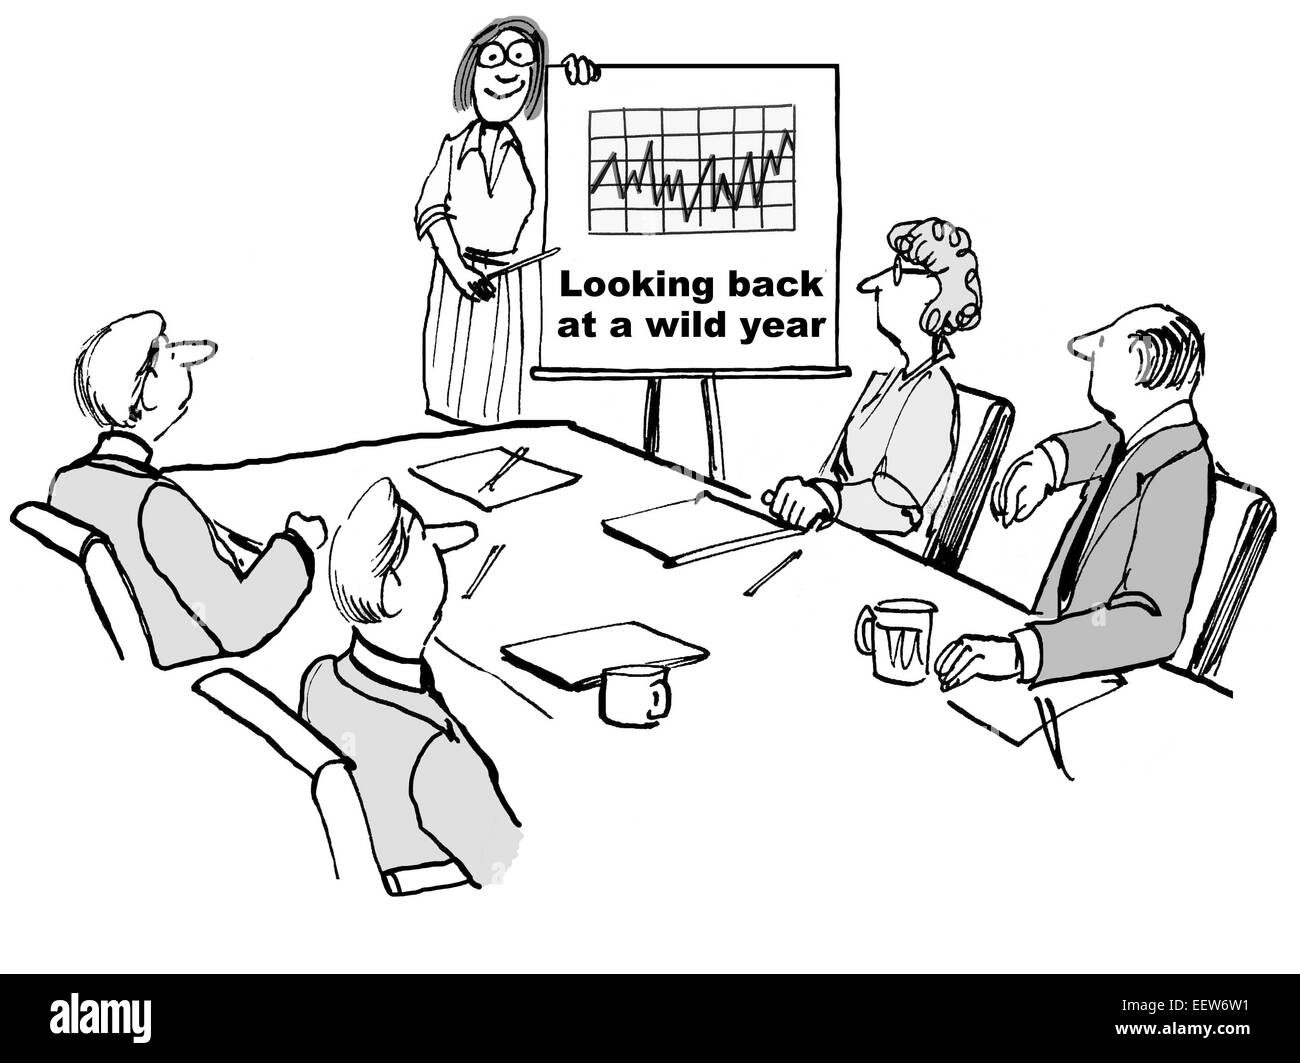 Cartoon showing businesspeople in a meeting looking at a chart showing inconsistent annual business results. Stock Photo